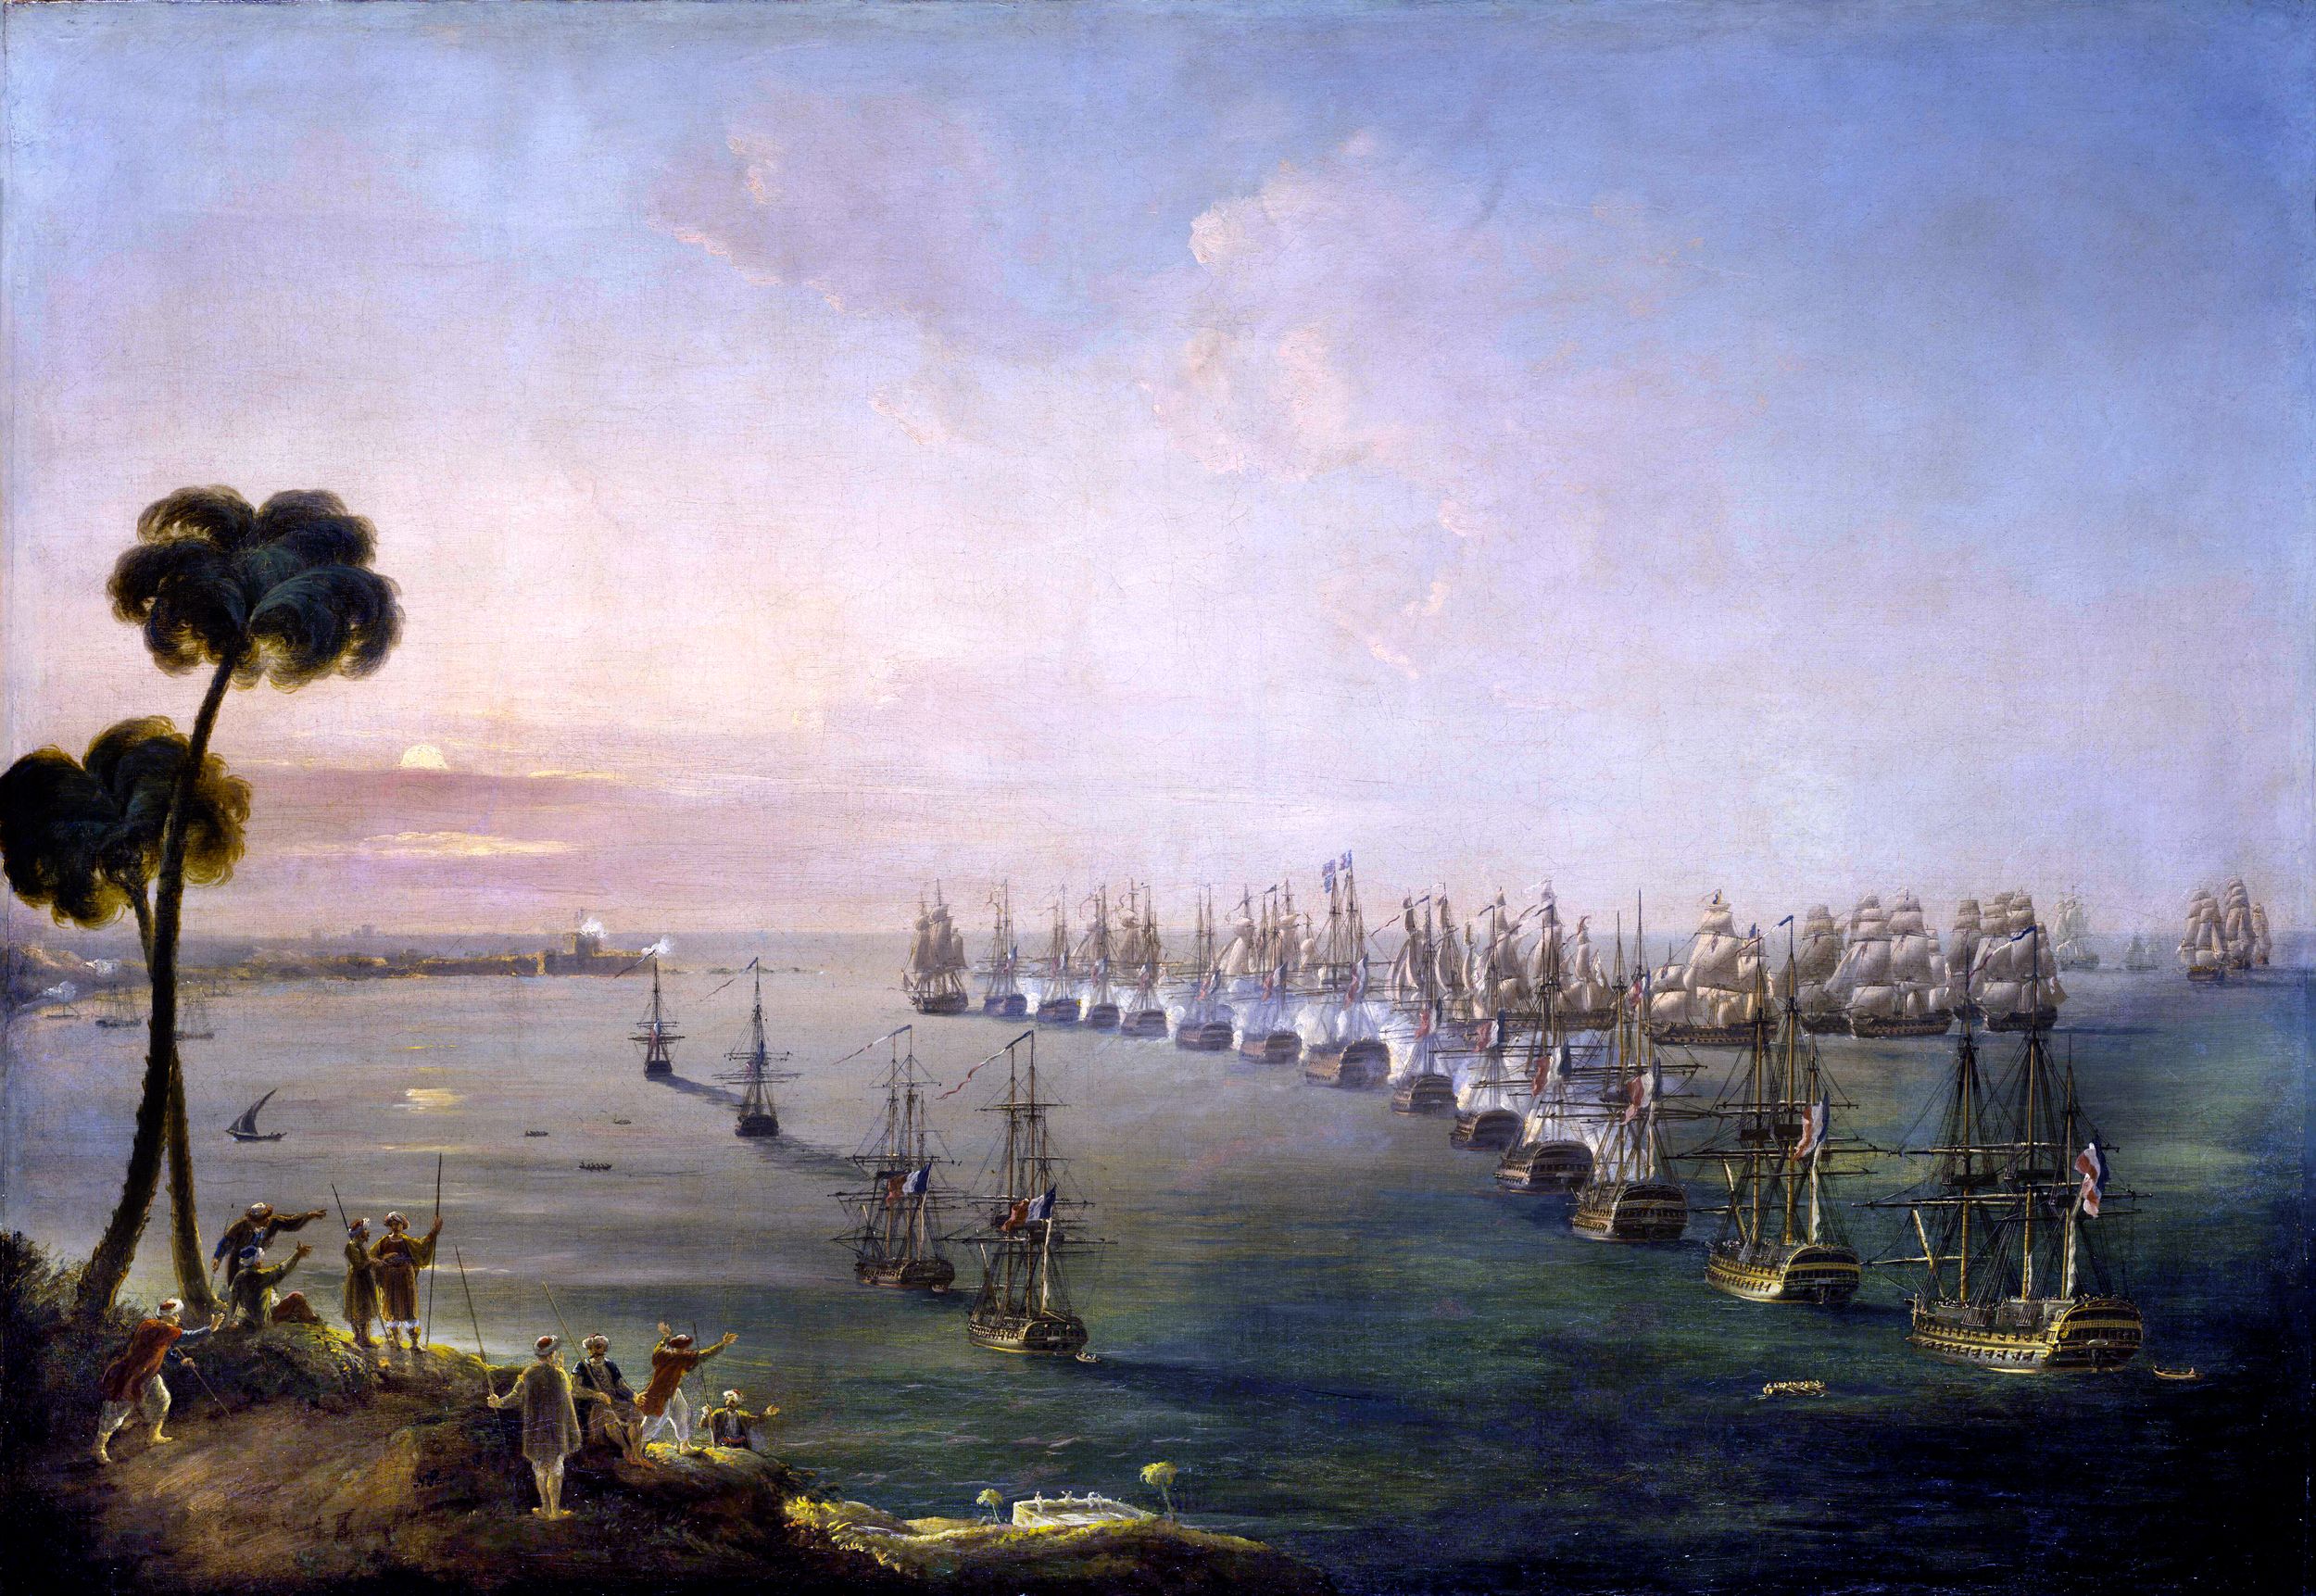 The beginning of the Battle of Nile, at sunset. Nelson’s fleet, led by HMS Goliath, is shown at the head of the anchored French line, with the Aboukir fort, in the background at left. The brunt of the British ship attack is from the seaward side, but  the Zealous can be seen rounding the bow of the French Guerrier, at the head of the French line, to lead an attack from the landward side. At right is the rearmost of the anchored French ships of the line, the Timoleon.  Painting by Nicholas Pocock, 1808.